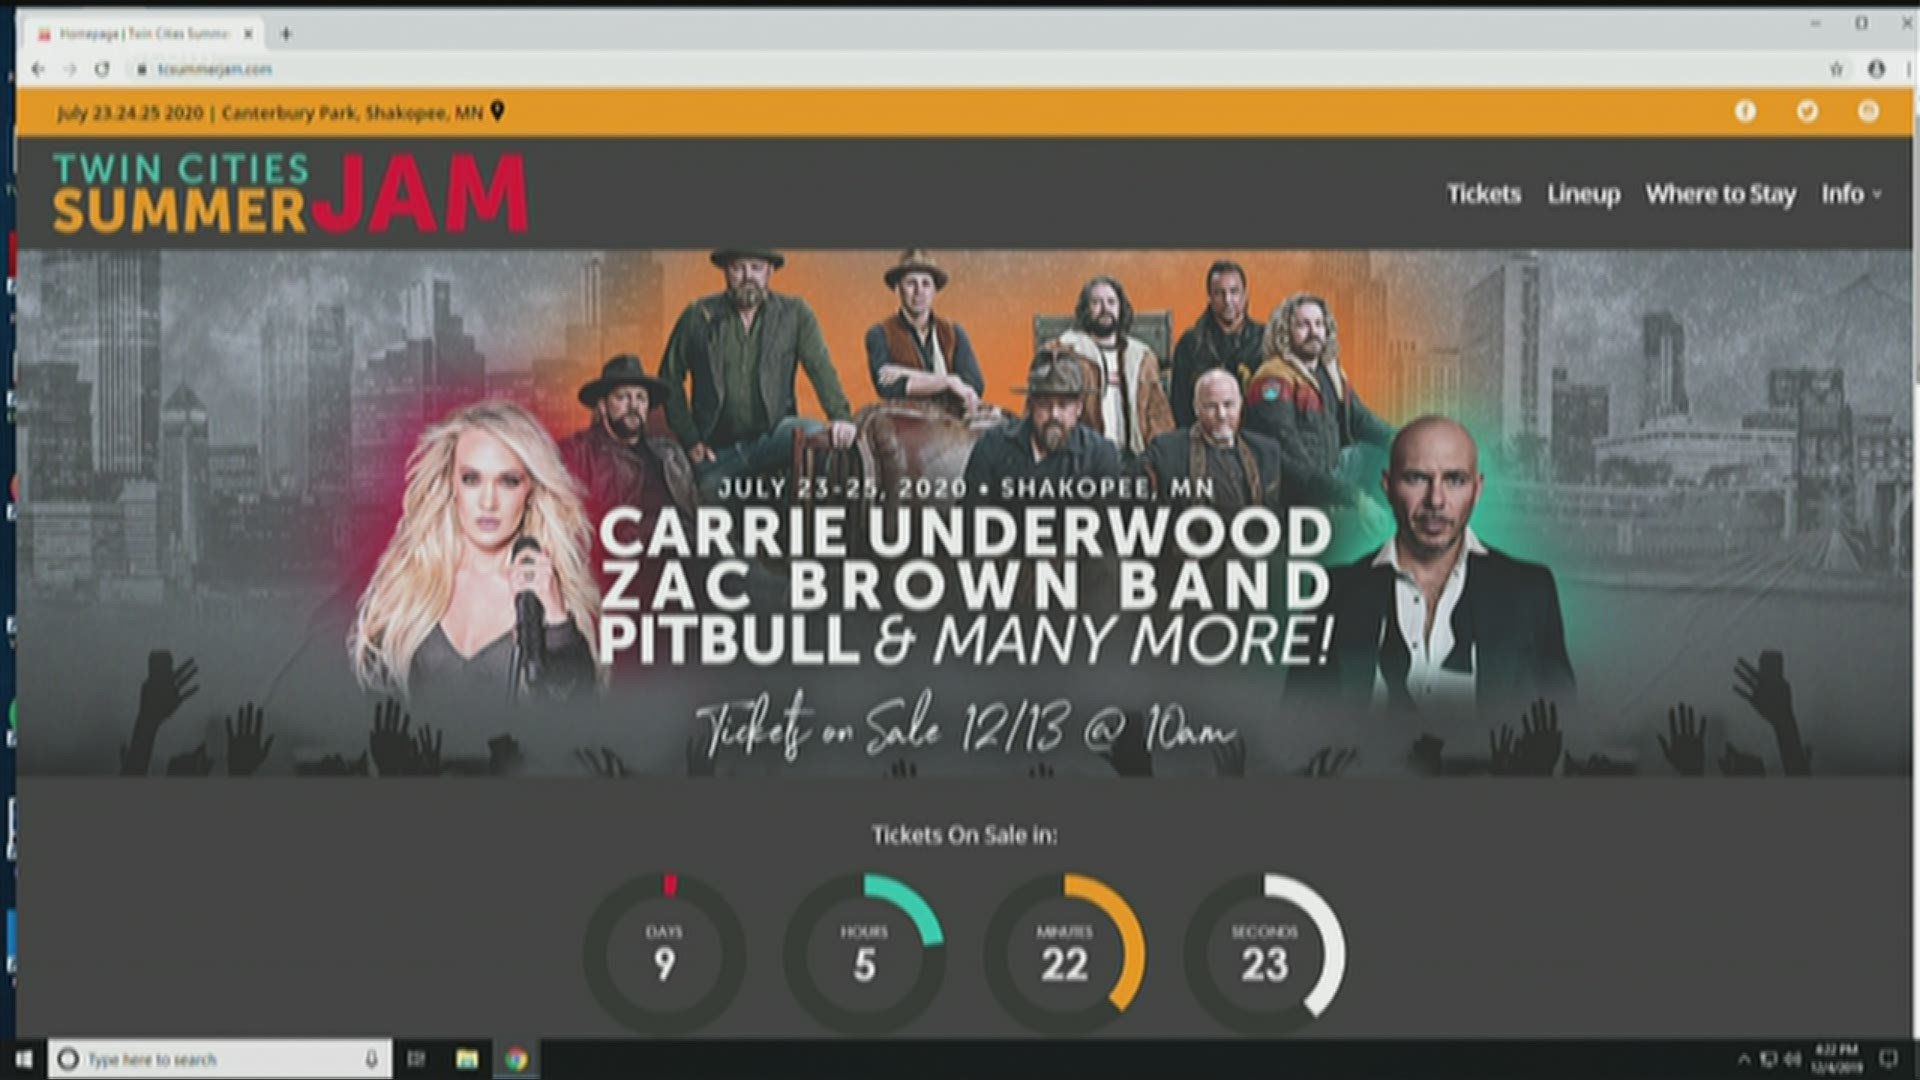 Carrie Underwood will be part of the concert at Canterbury Park in July 2020, along with Pitbull and Zac Brown Band.